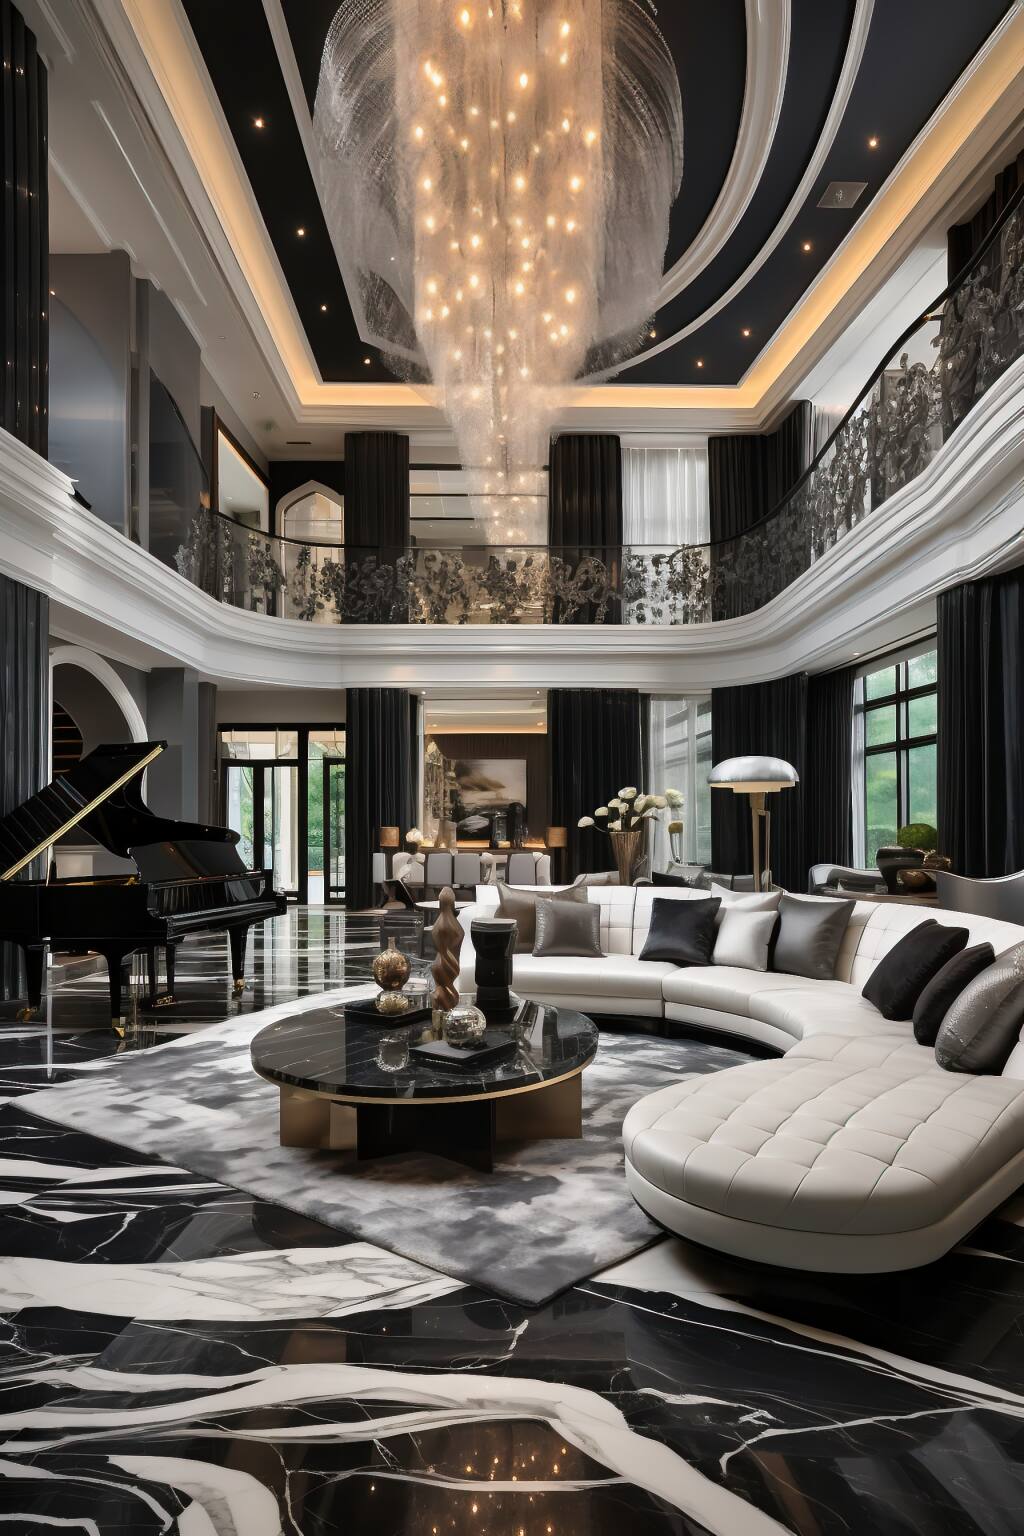 A Luxurious Living Room Featuring A Black Leather Sectional, Silver Decorative Sculptures, And A White Marble Coffee Table, All Illuminated By A Grand Chandelier And Natural Light.